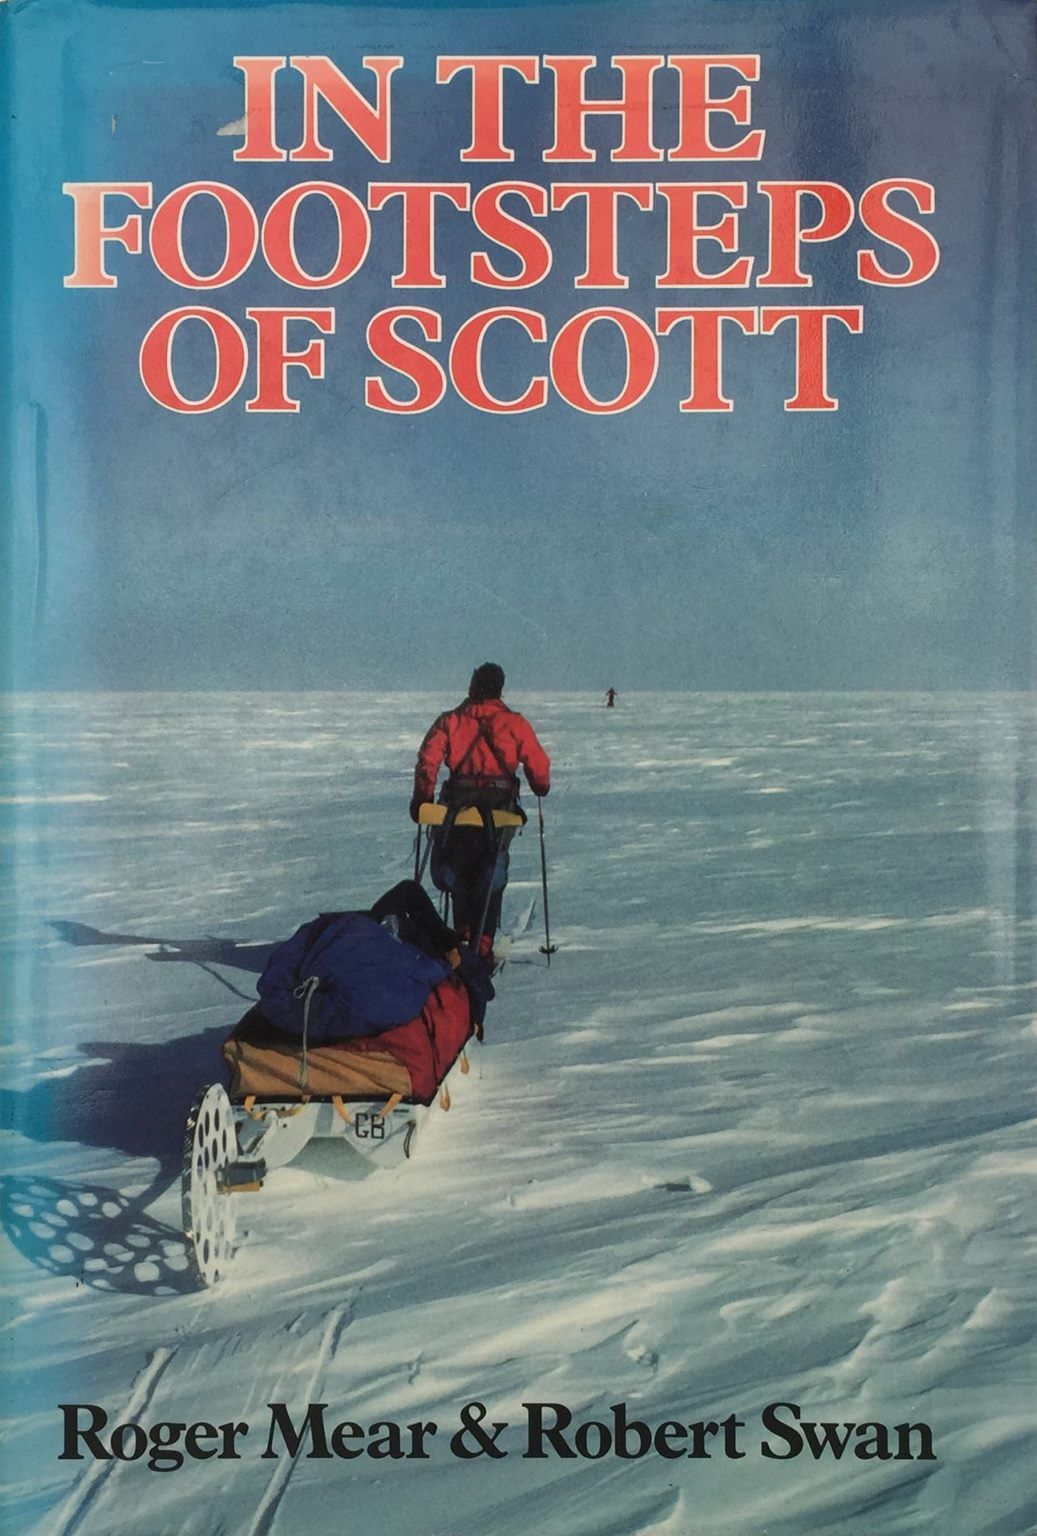 IN THE FOOTSTEPS OF SCOTT